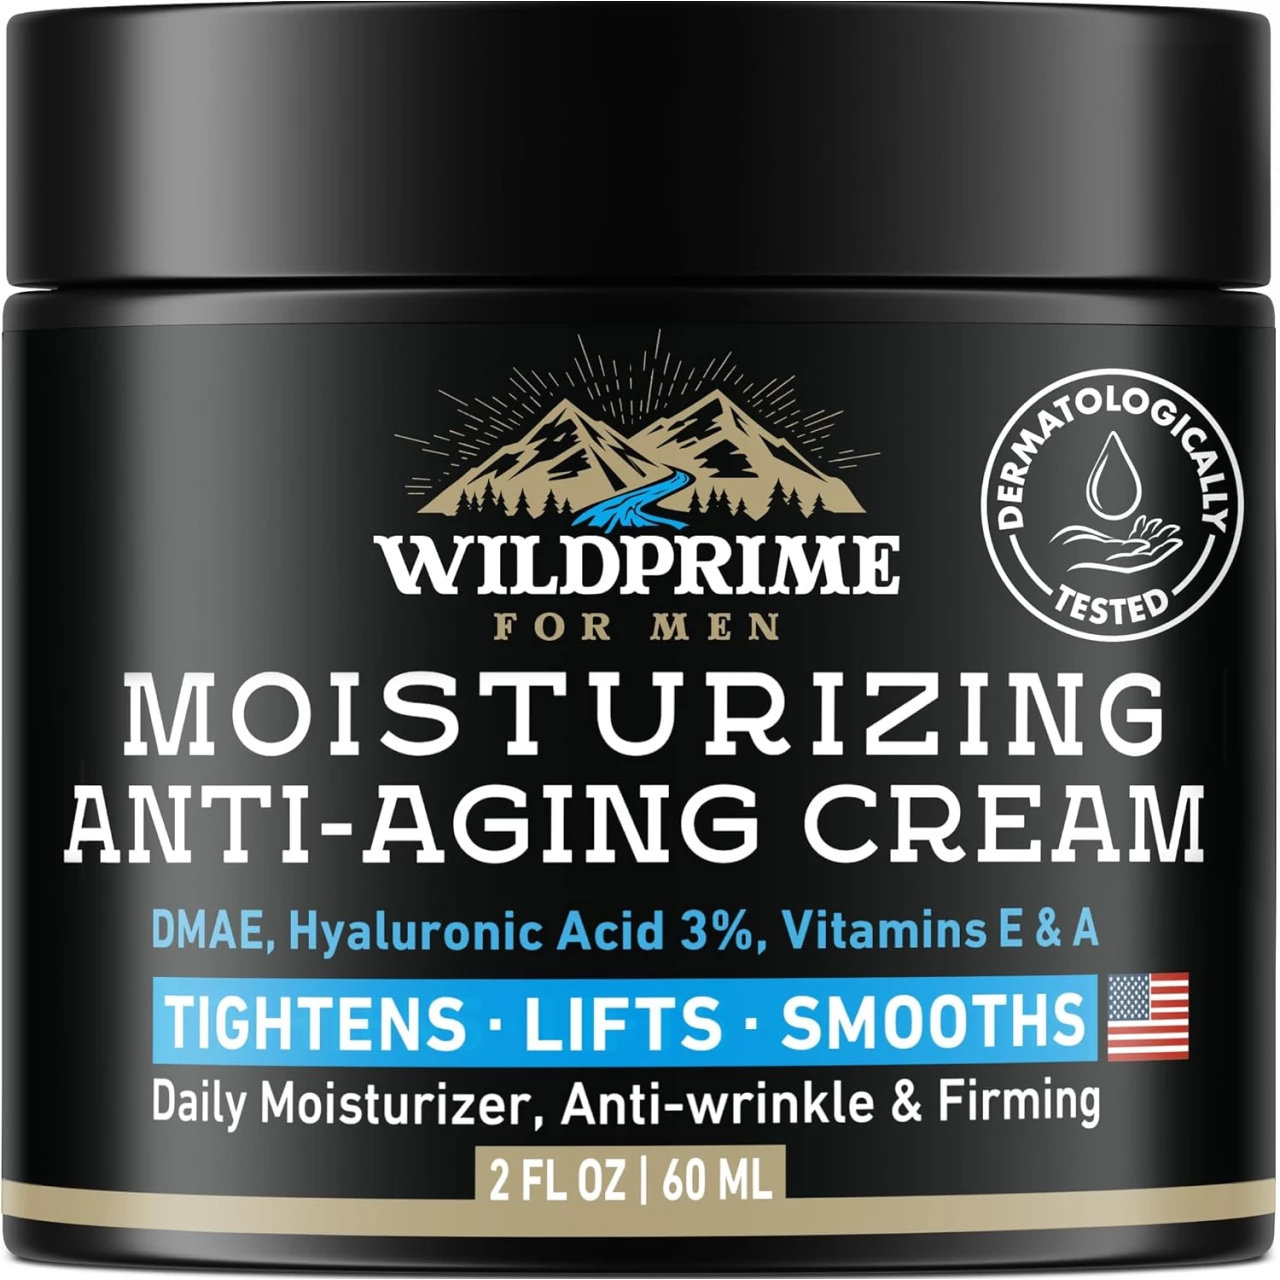 Anti-Aging Face Moisturizer - Face Cream For Men with Collagen, Retinol &amp; Hyaluronic Acid - Made in USA - Fast Anti Aging Effect - Night Cream - Anti Wrinkle Facial Moisturizer - Mens Cream 2oz